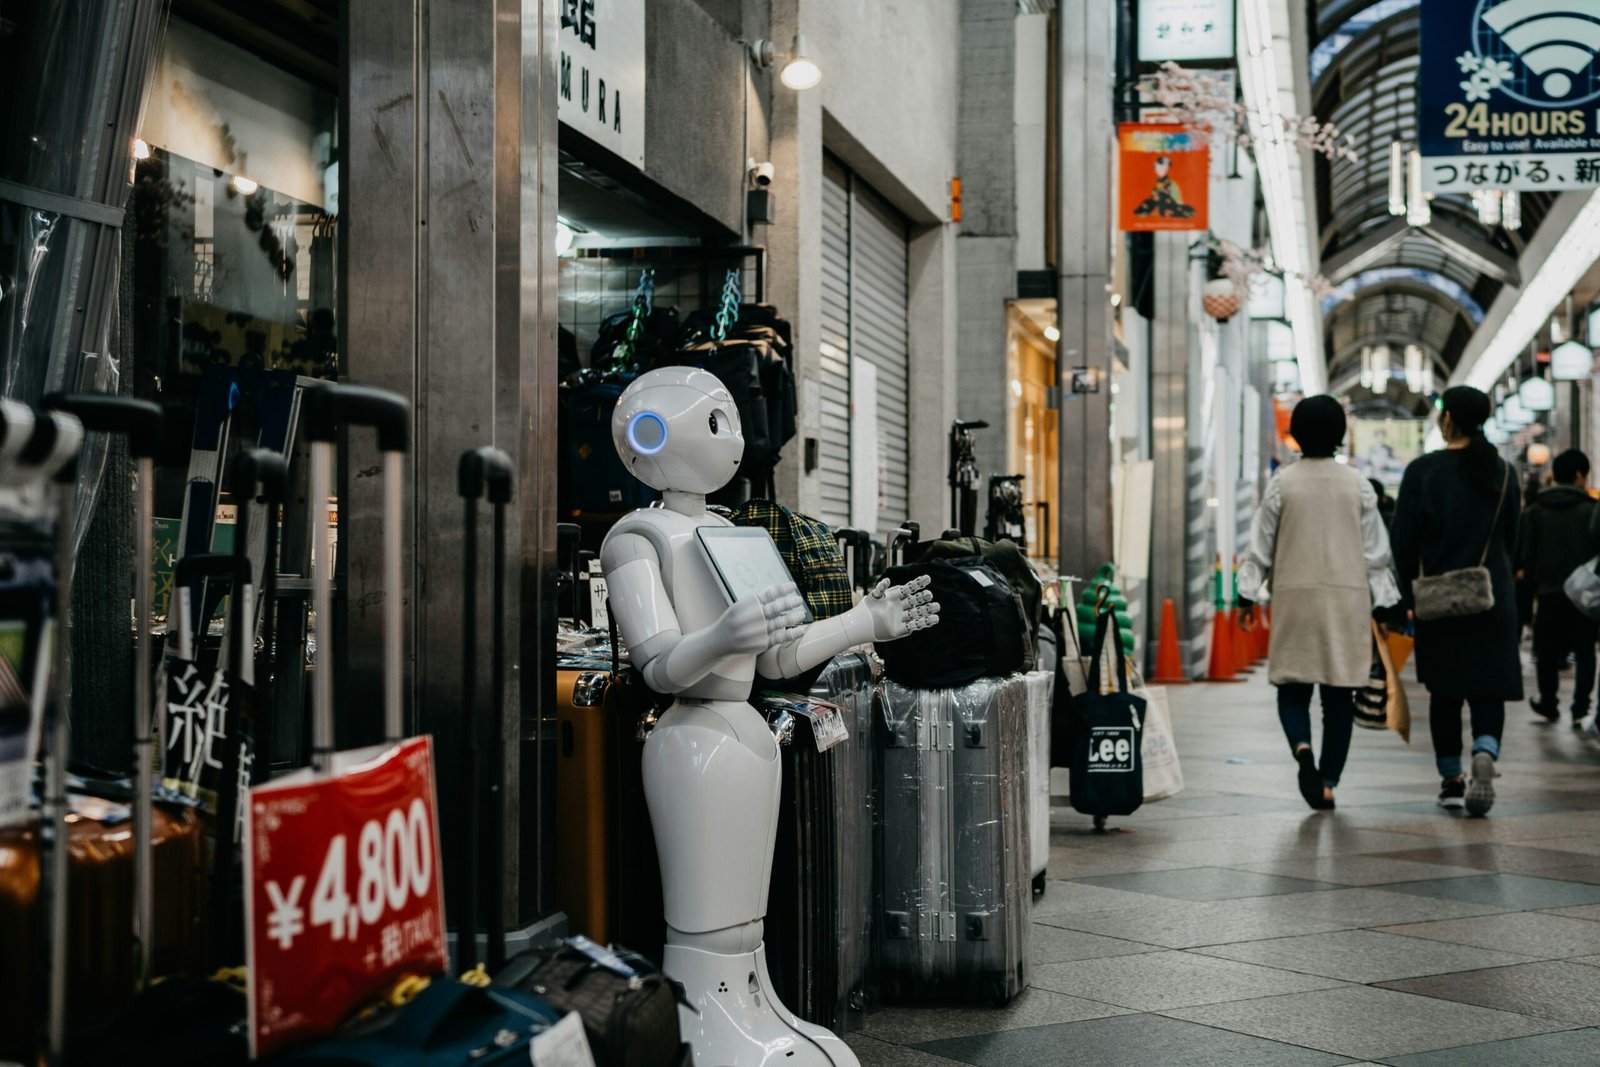 Impact of AI, robot standing near luggage bags